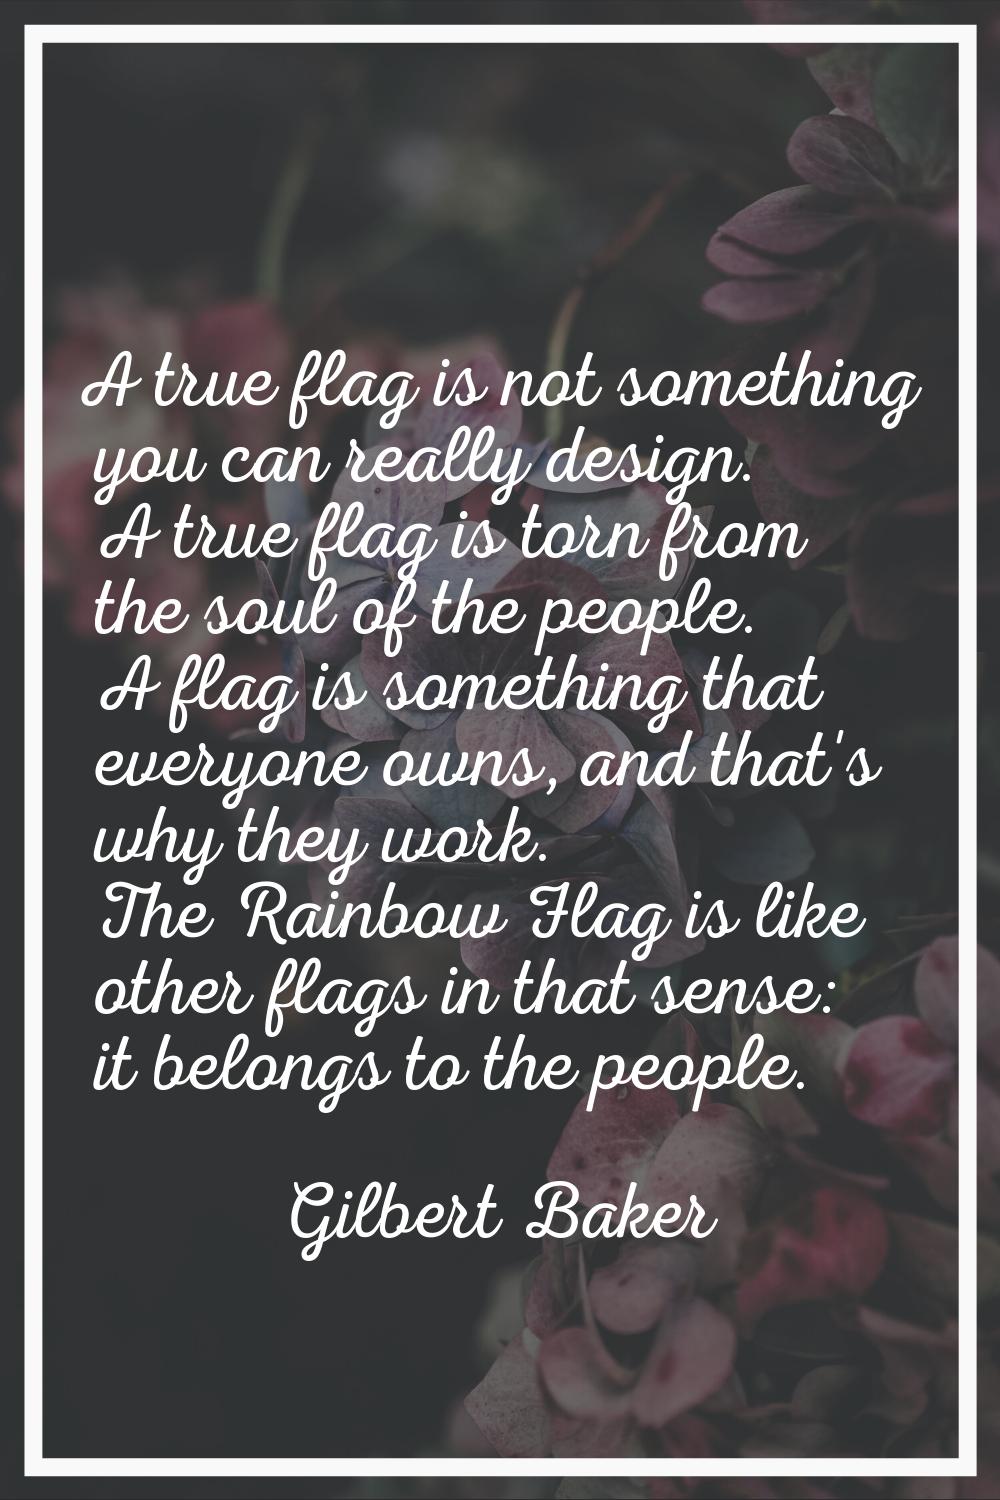 A true flag is not something you can really design. A true flag is torn from the soul of the people